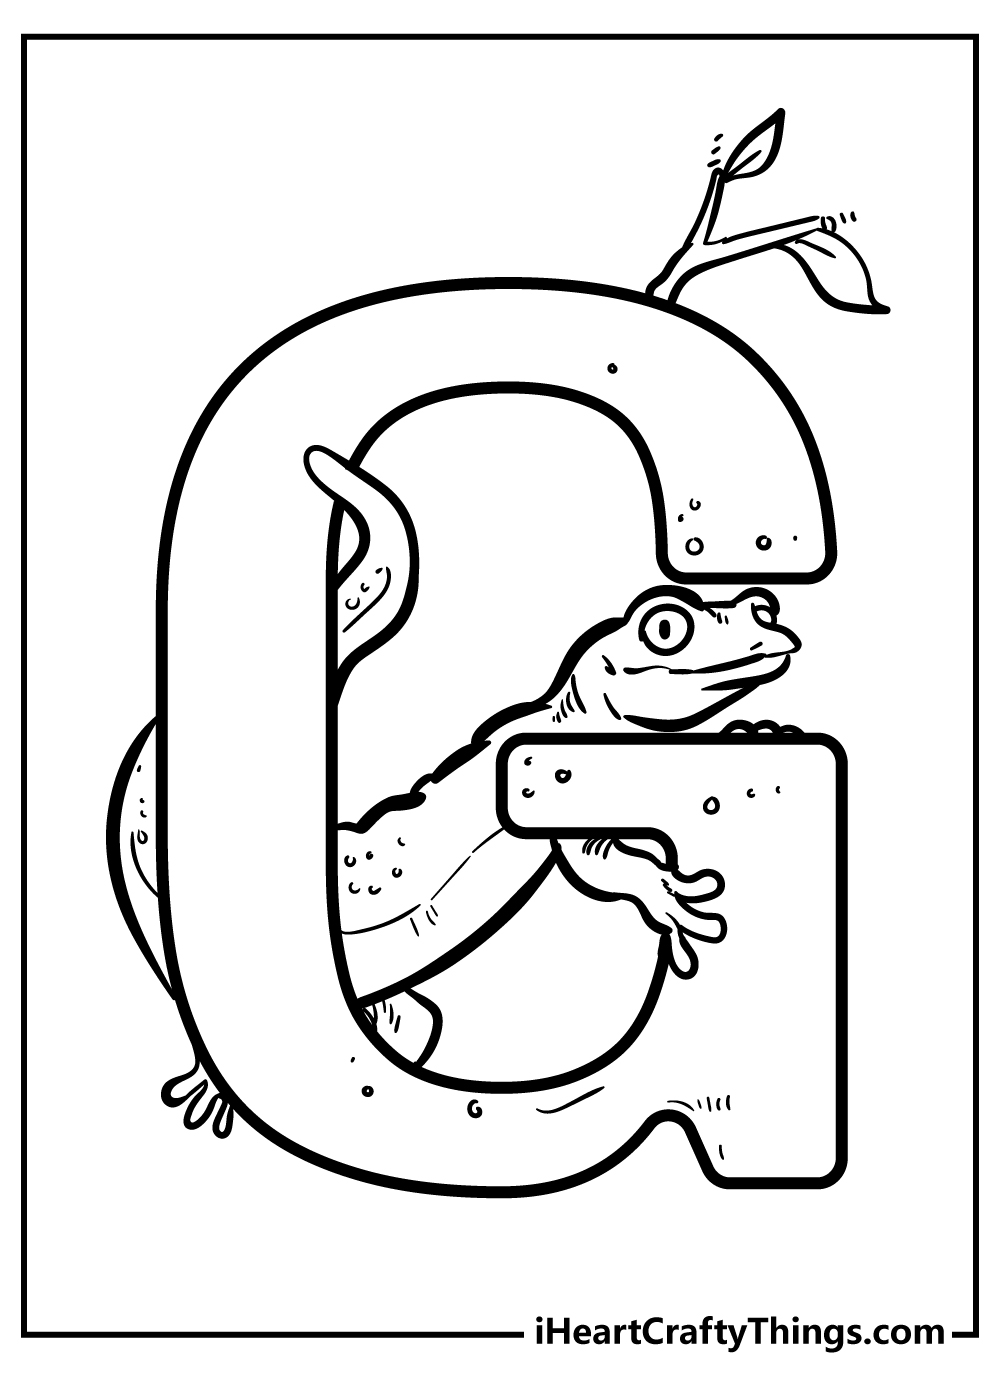 Letter G Coloring Pages for kids free download